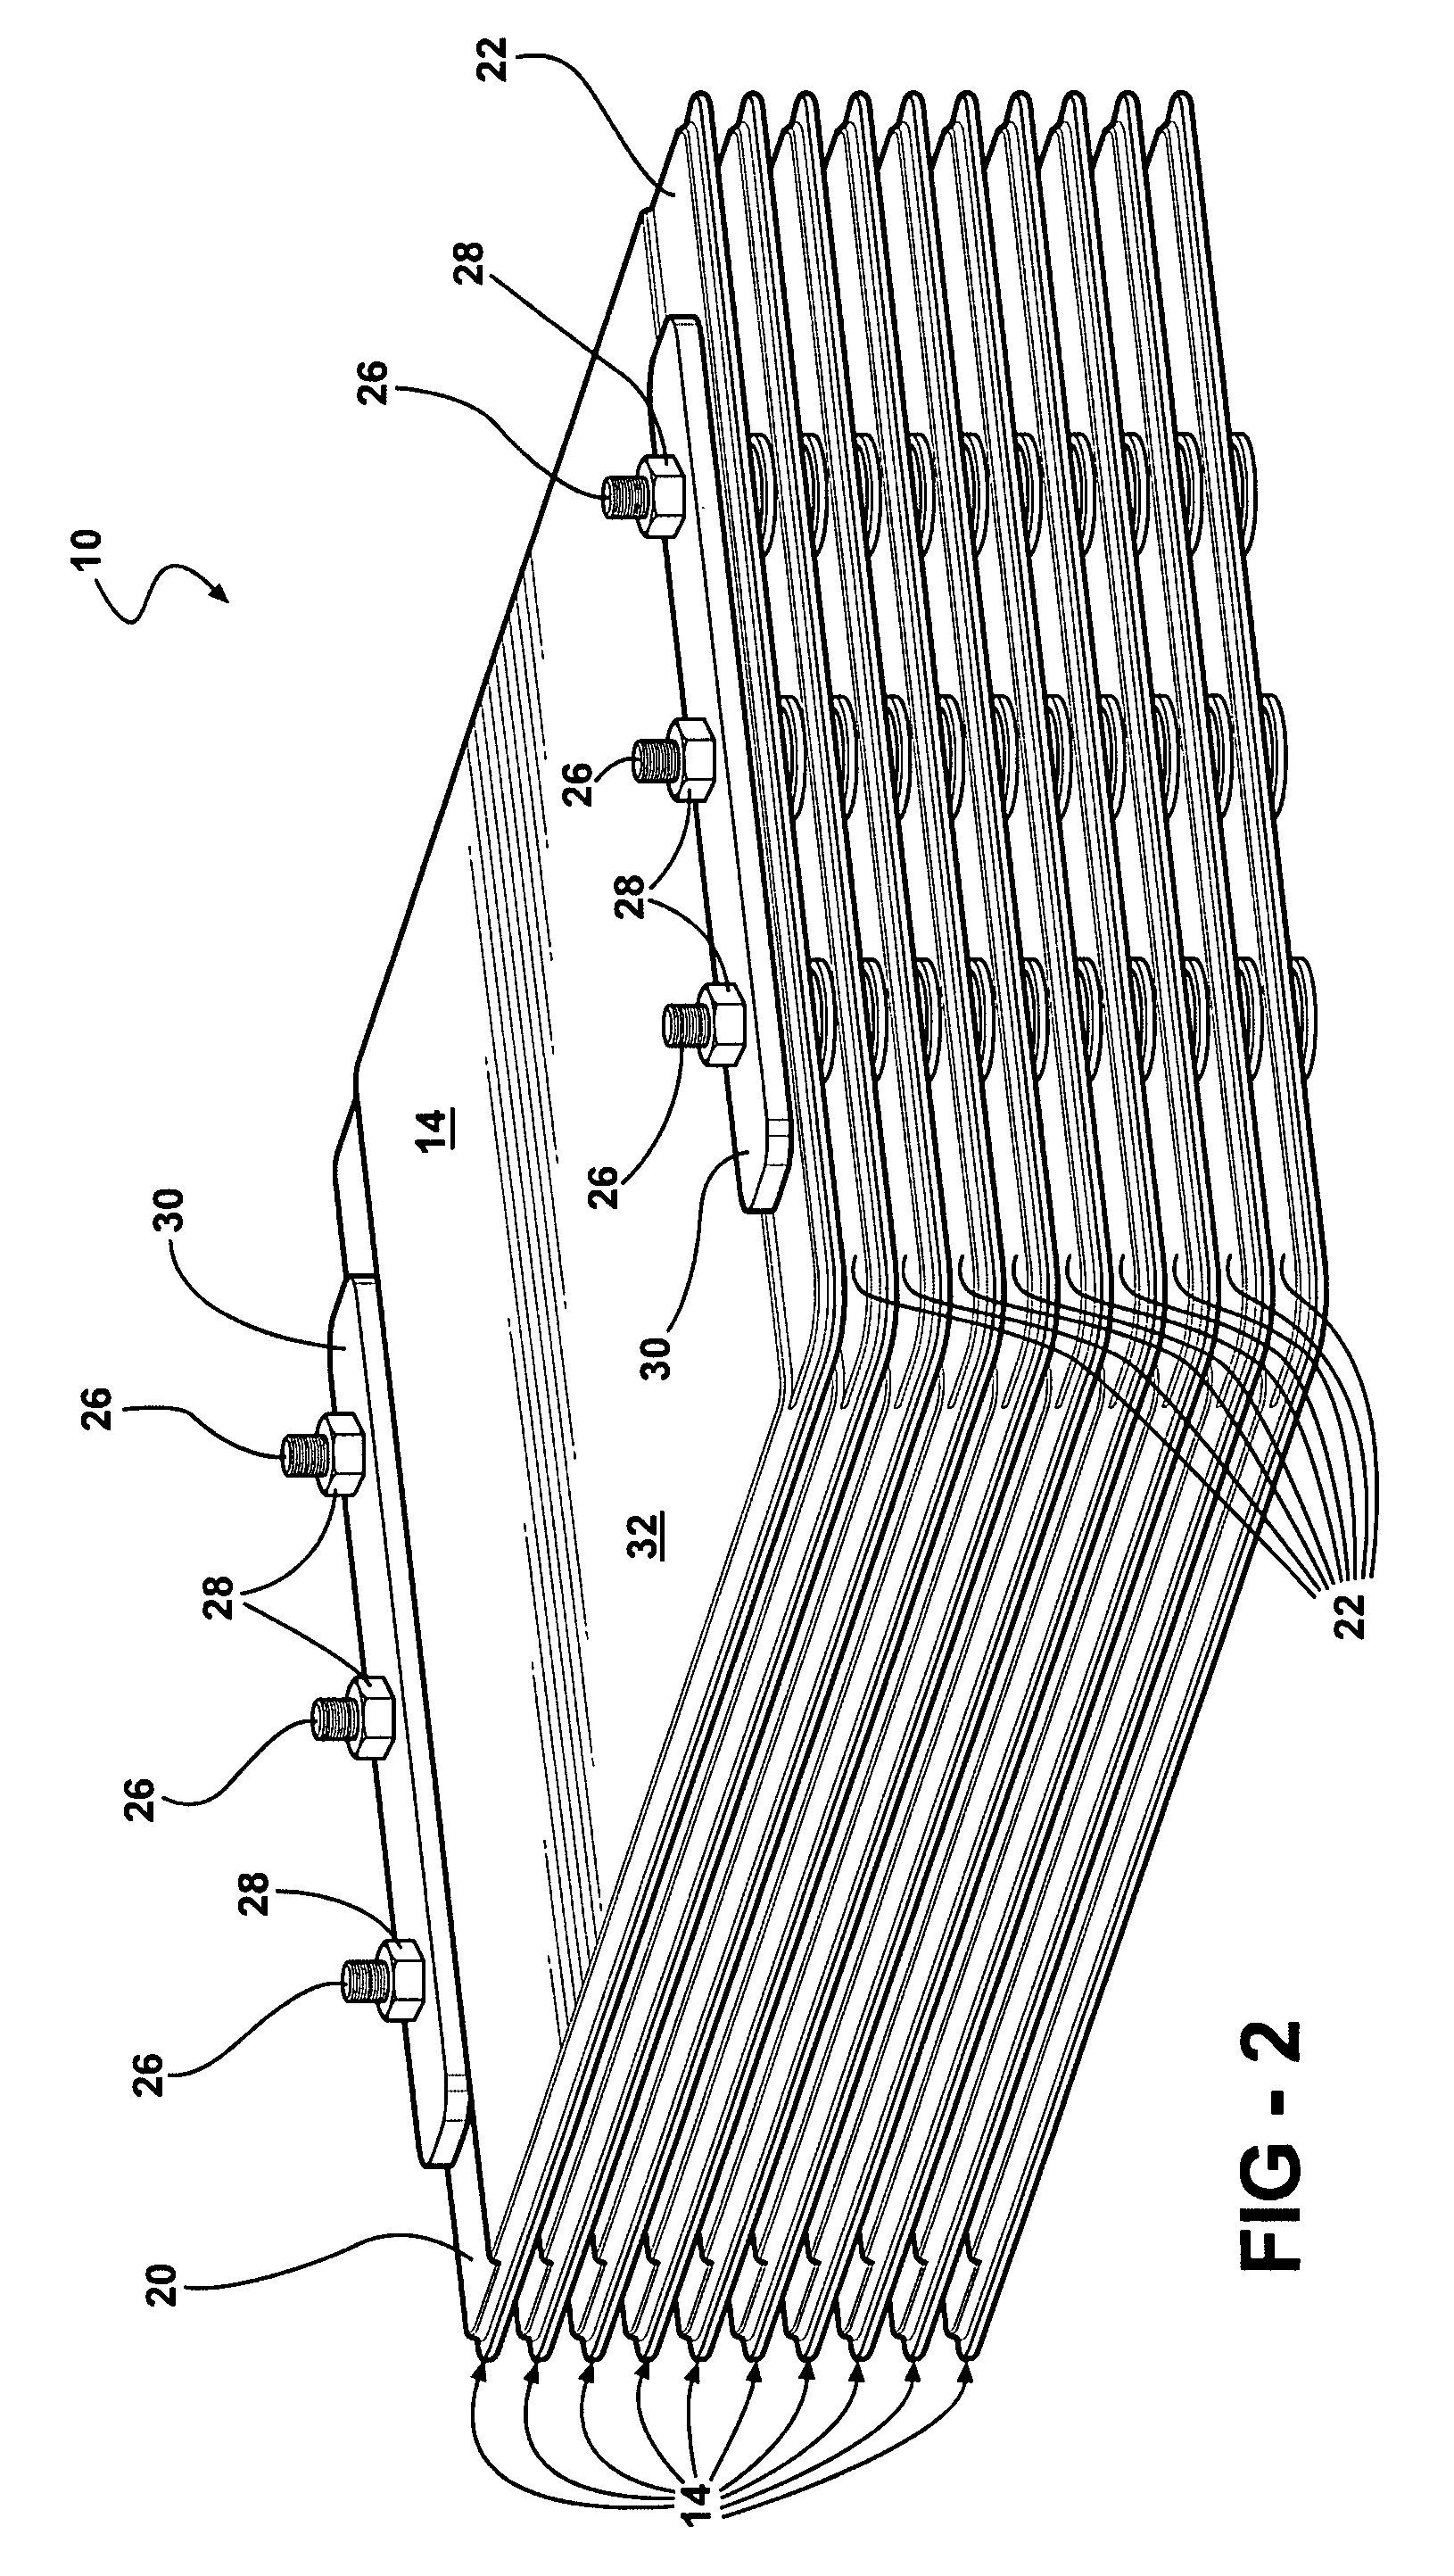 Battery assembly and method of forming the same